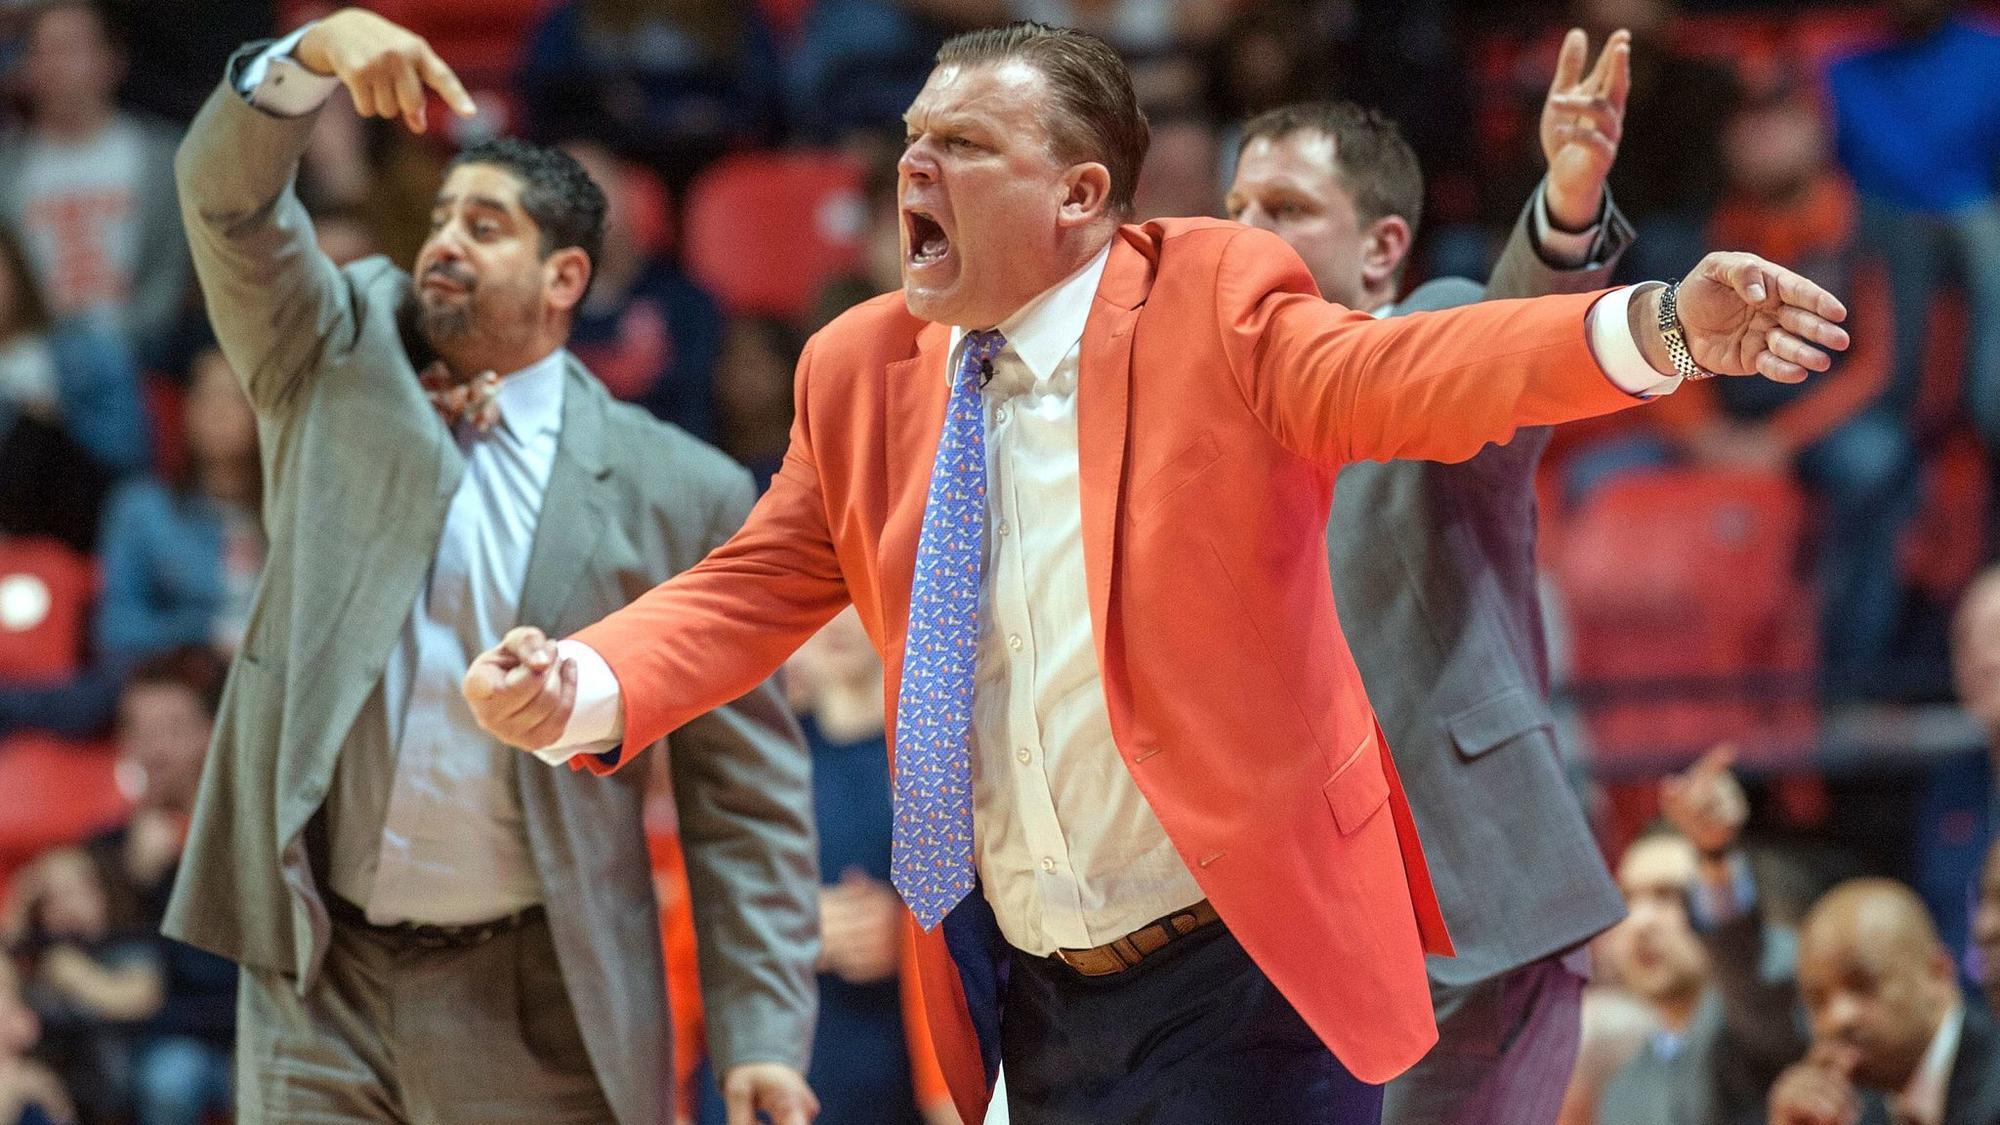 Illinois gets first conference victory, holding off Indiana 73-71